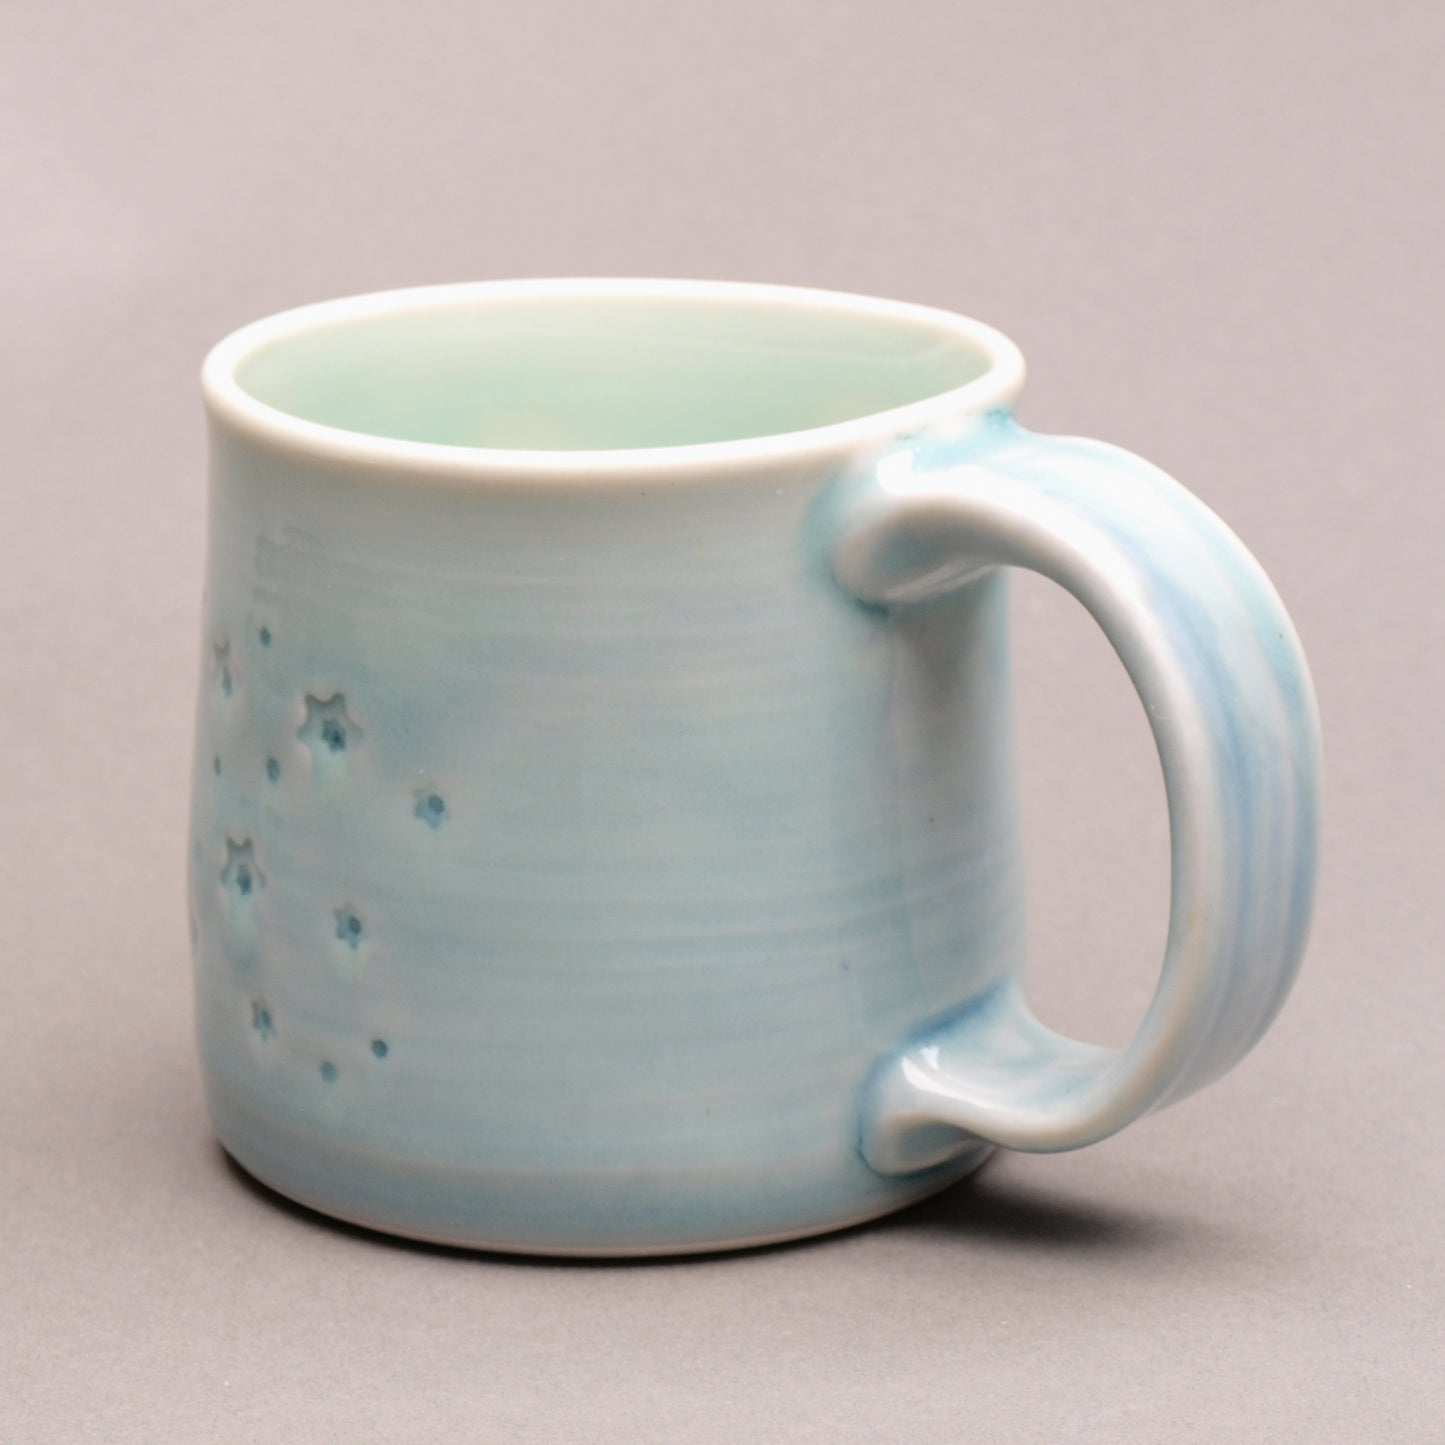 Handcrafted 'PARK CITY' Souvenir Mug with hummingbird by Mike Hays: Artistry, Comfort, and Durability